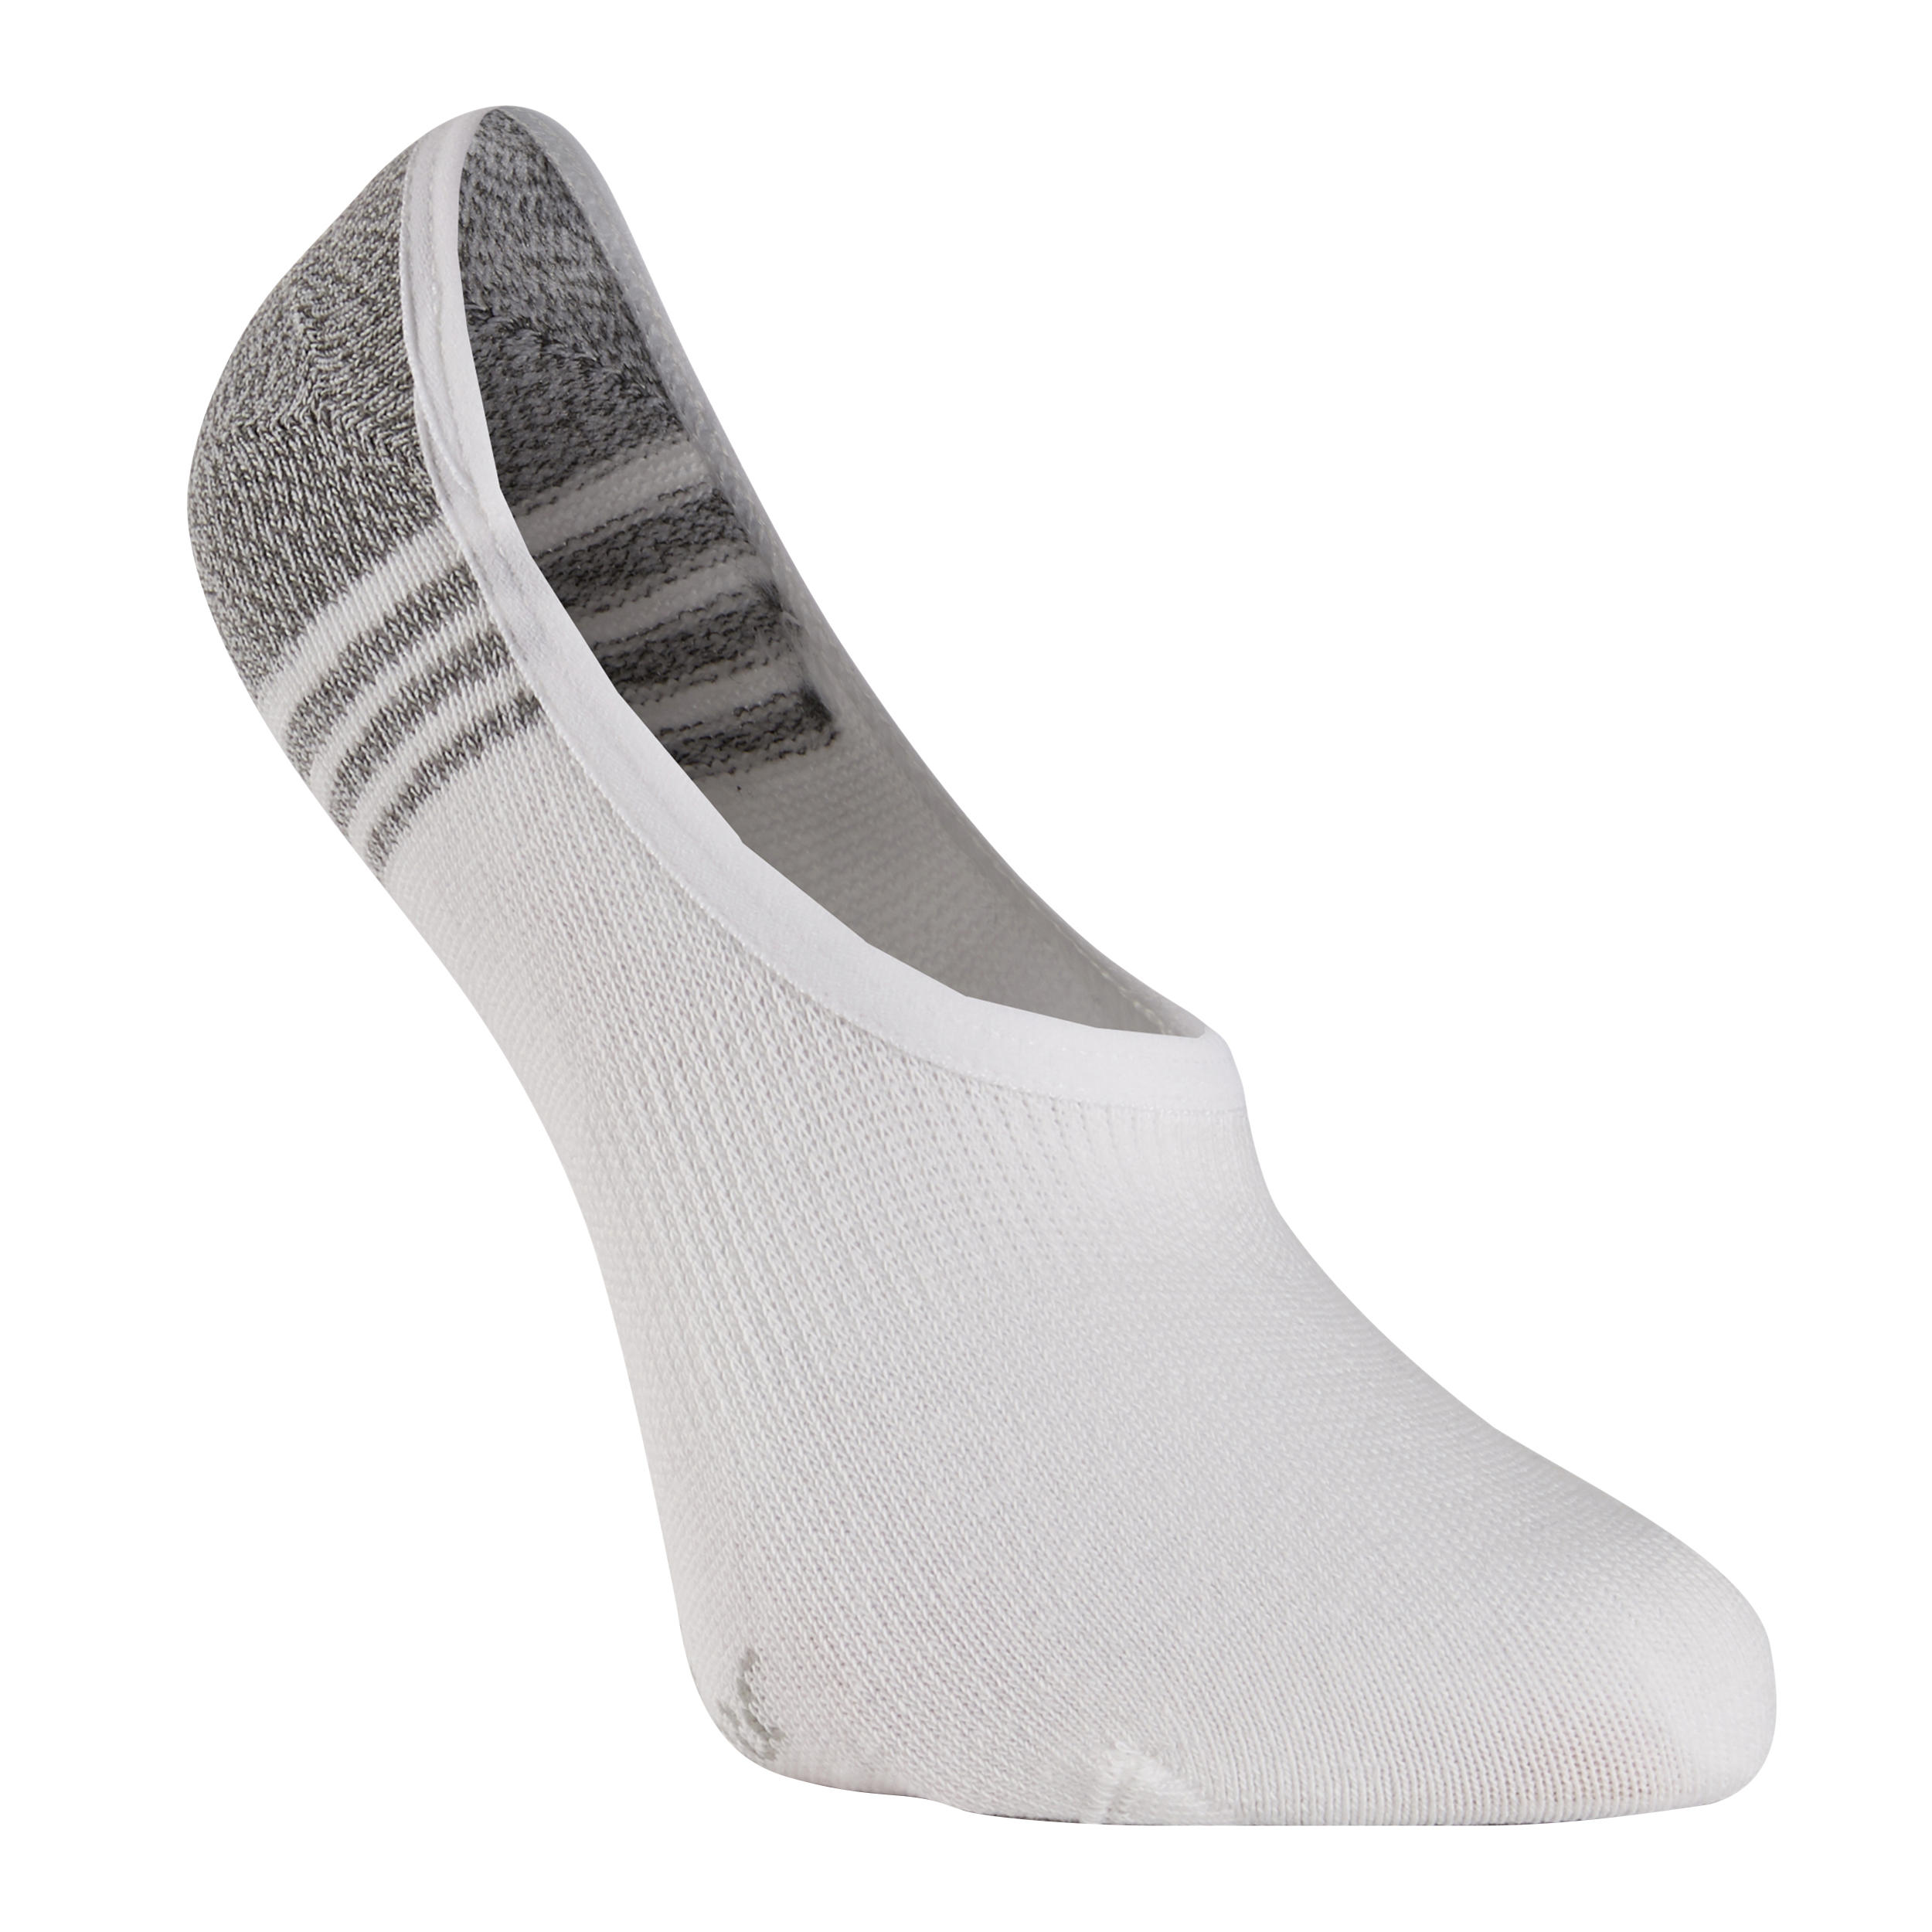 Fitness/Nordic Walking Socks WS 100 Invisible 3-Pack - white 2/7